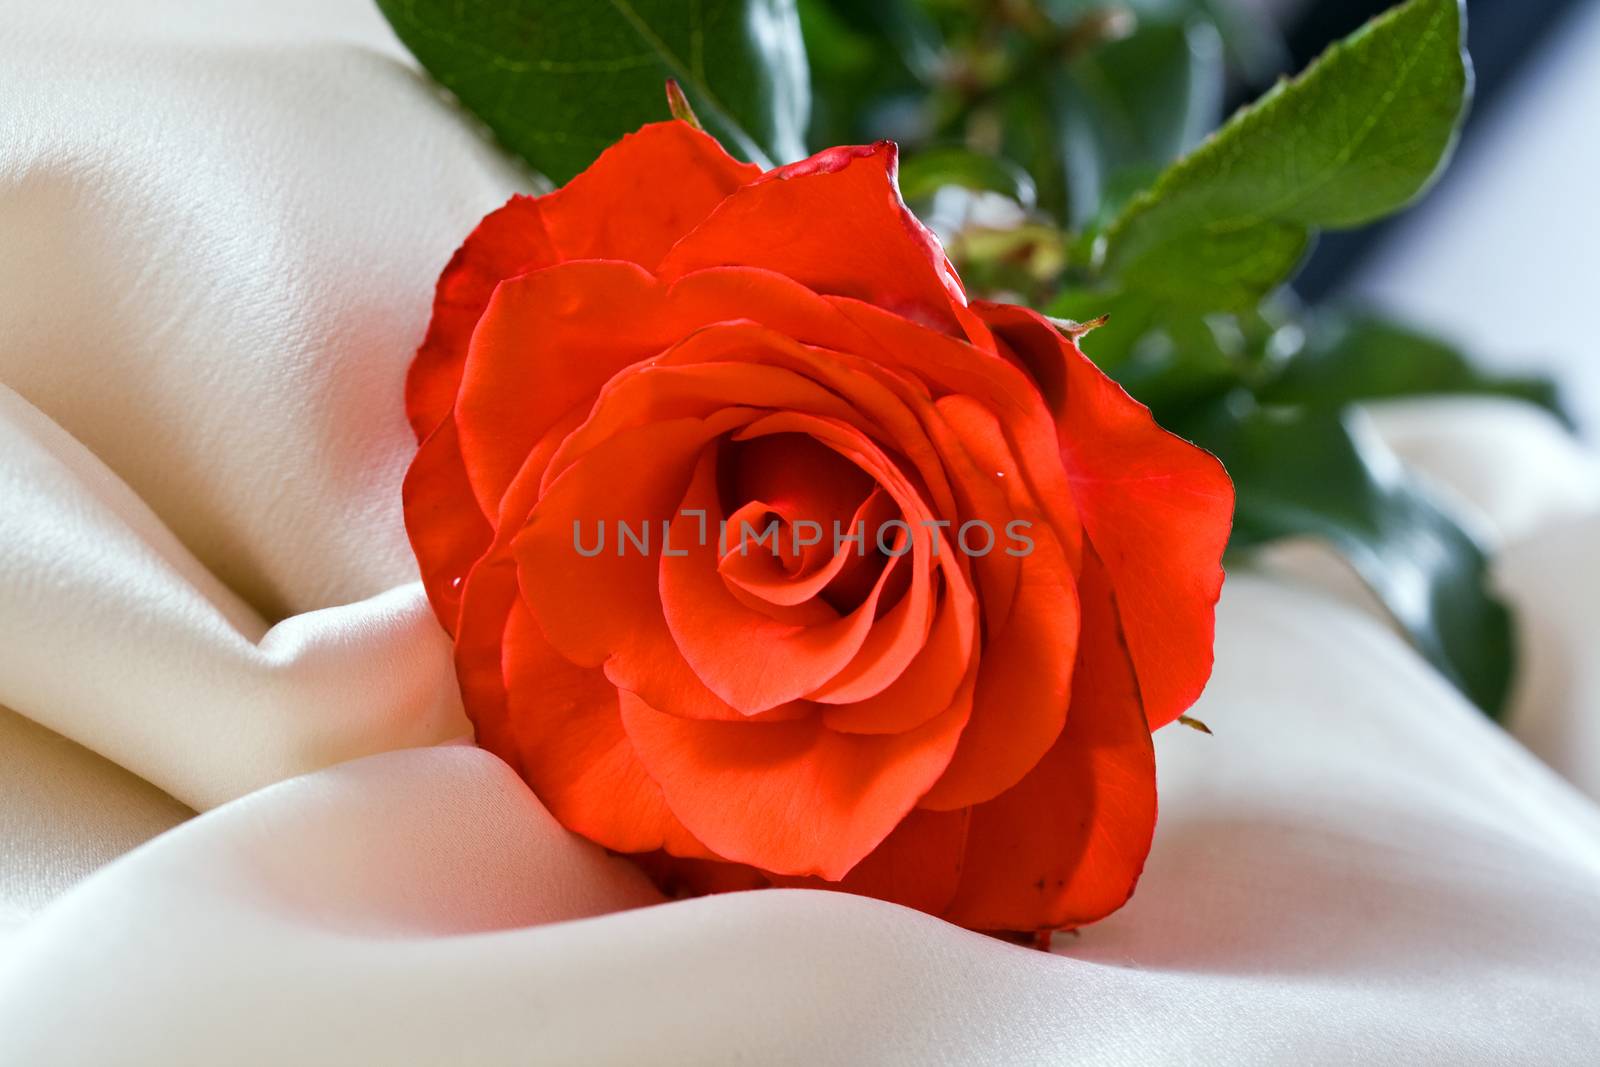 Beautiful and fresh rose on a gentle yellow silk